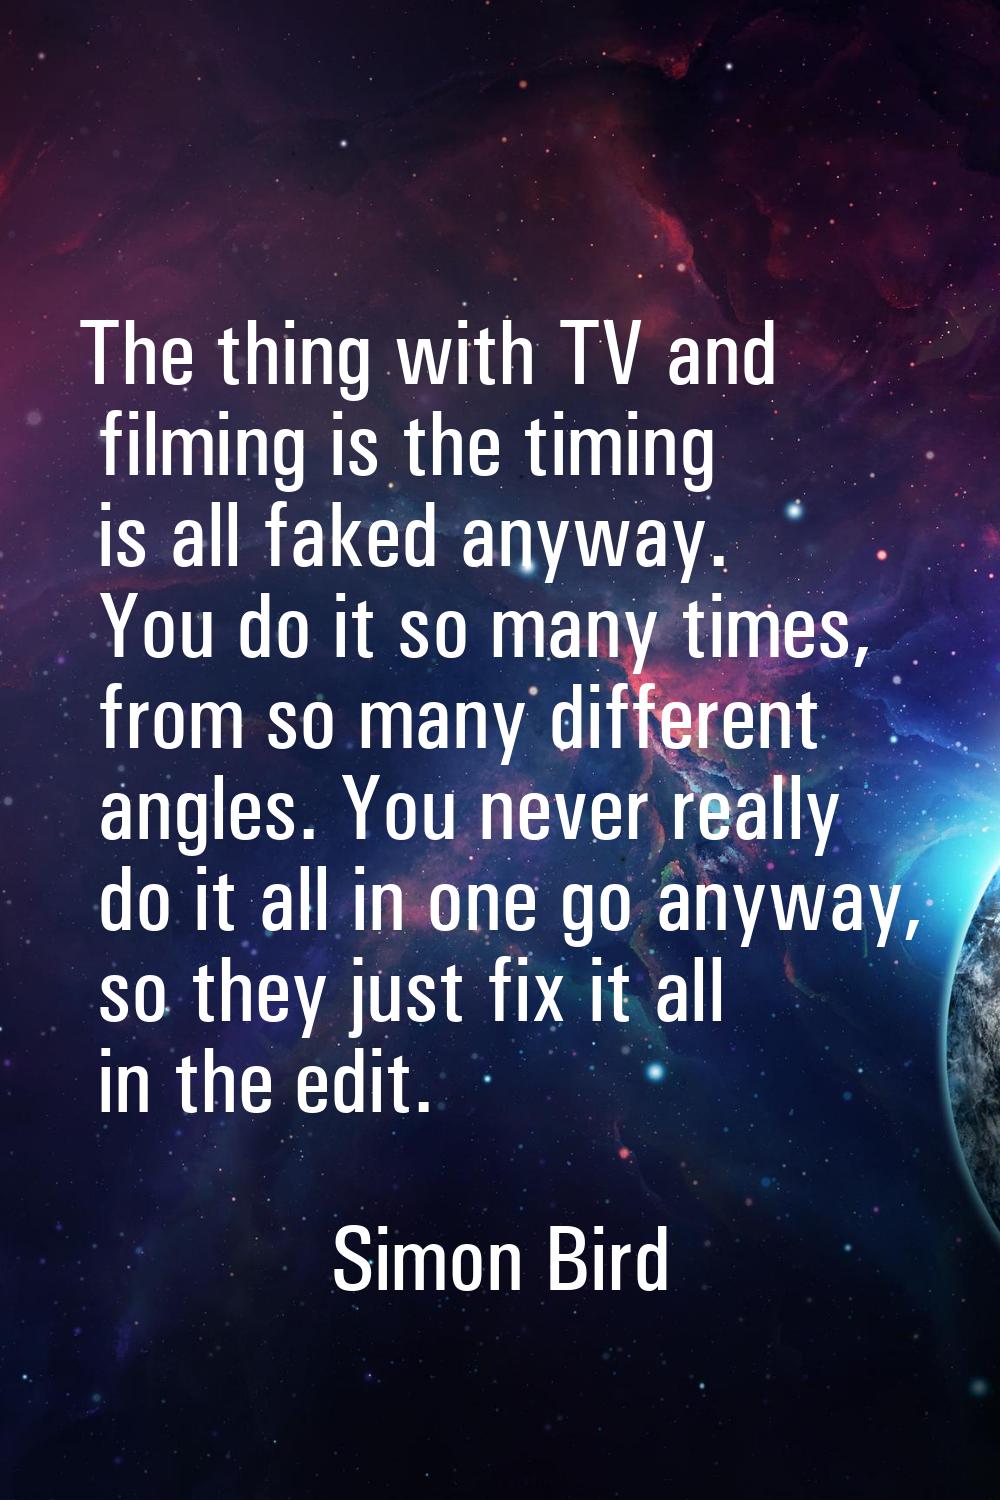 The thing with TV and filming is the timing is all faked anyway. You do it so many times, from so m